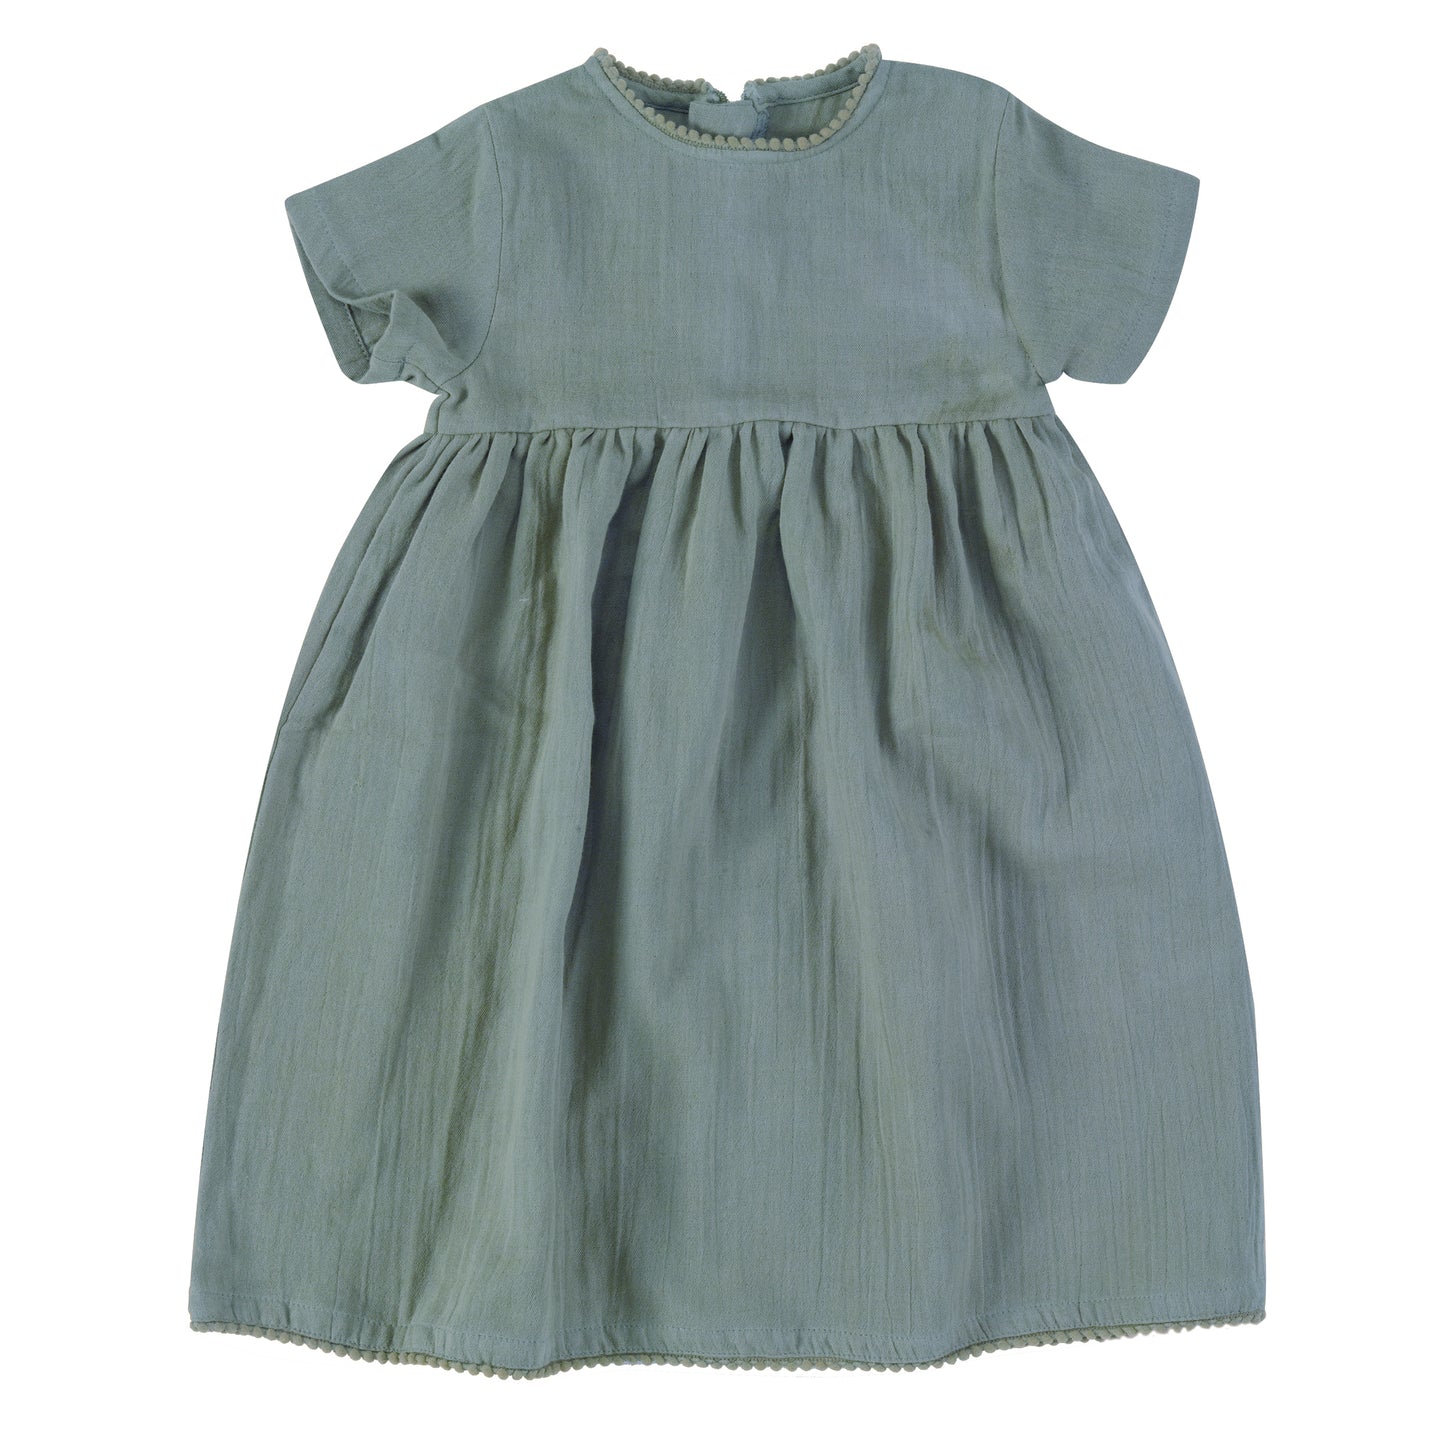 Turquoise muslin dress with short sleeves